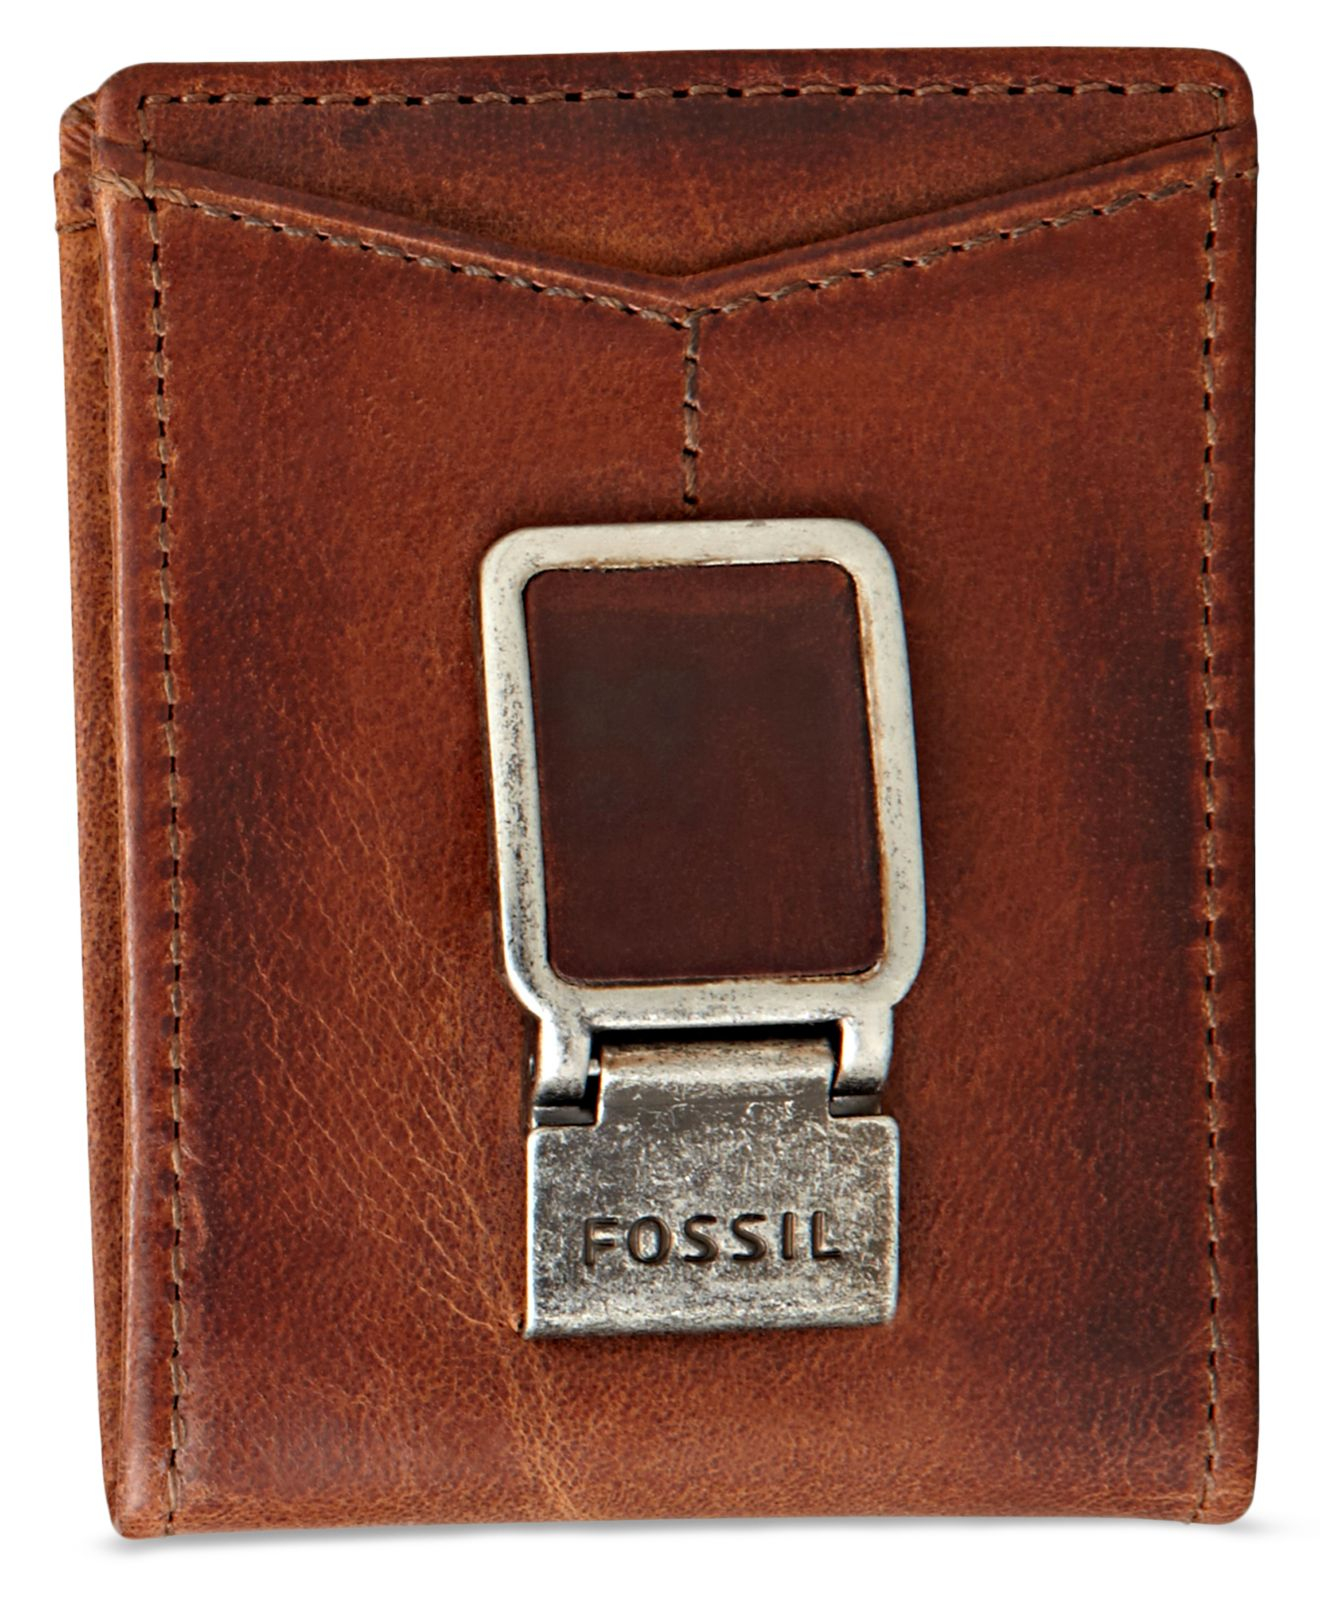 Lyst - Fossil Carson Id Bifold Wallet in Brown for Men